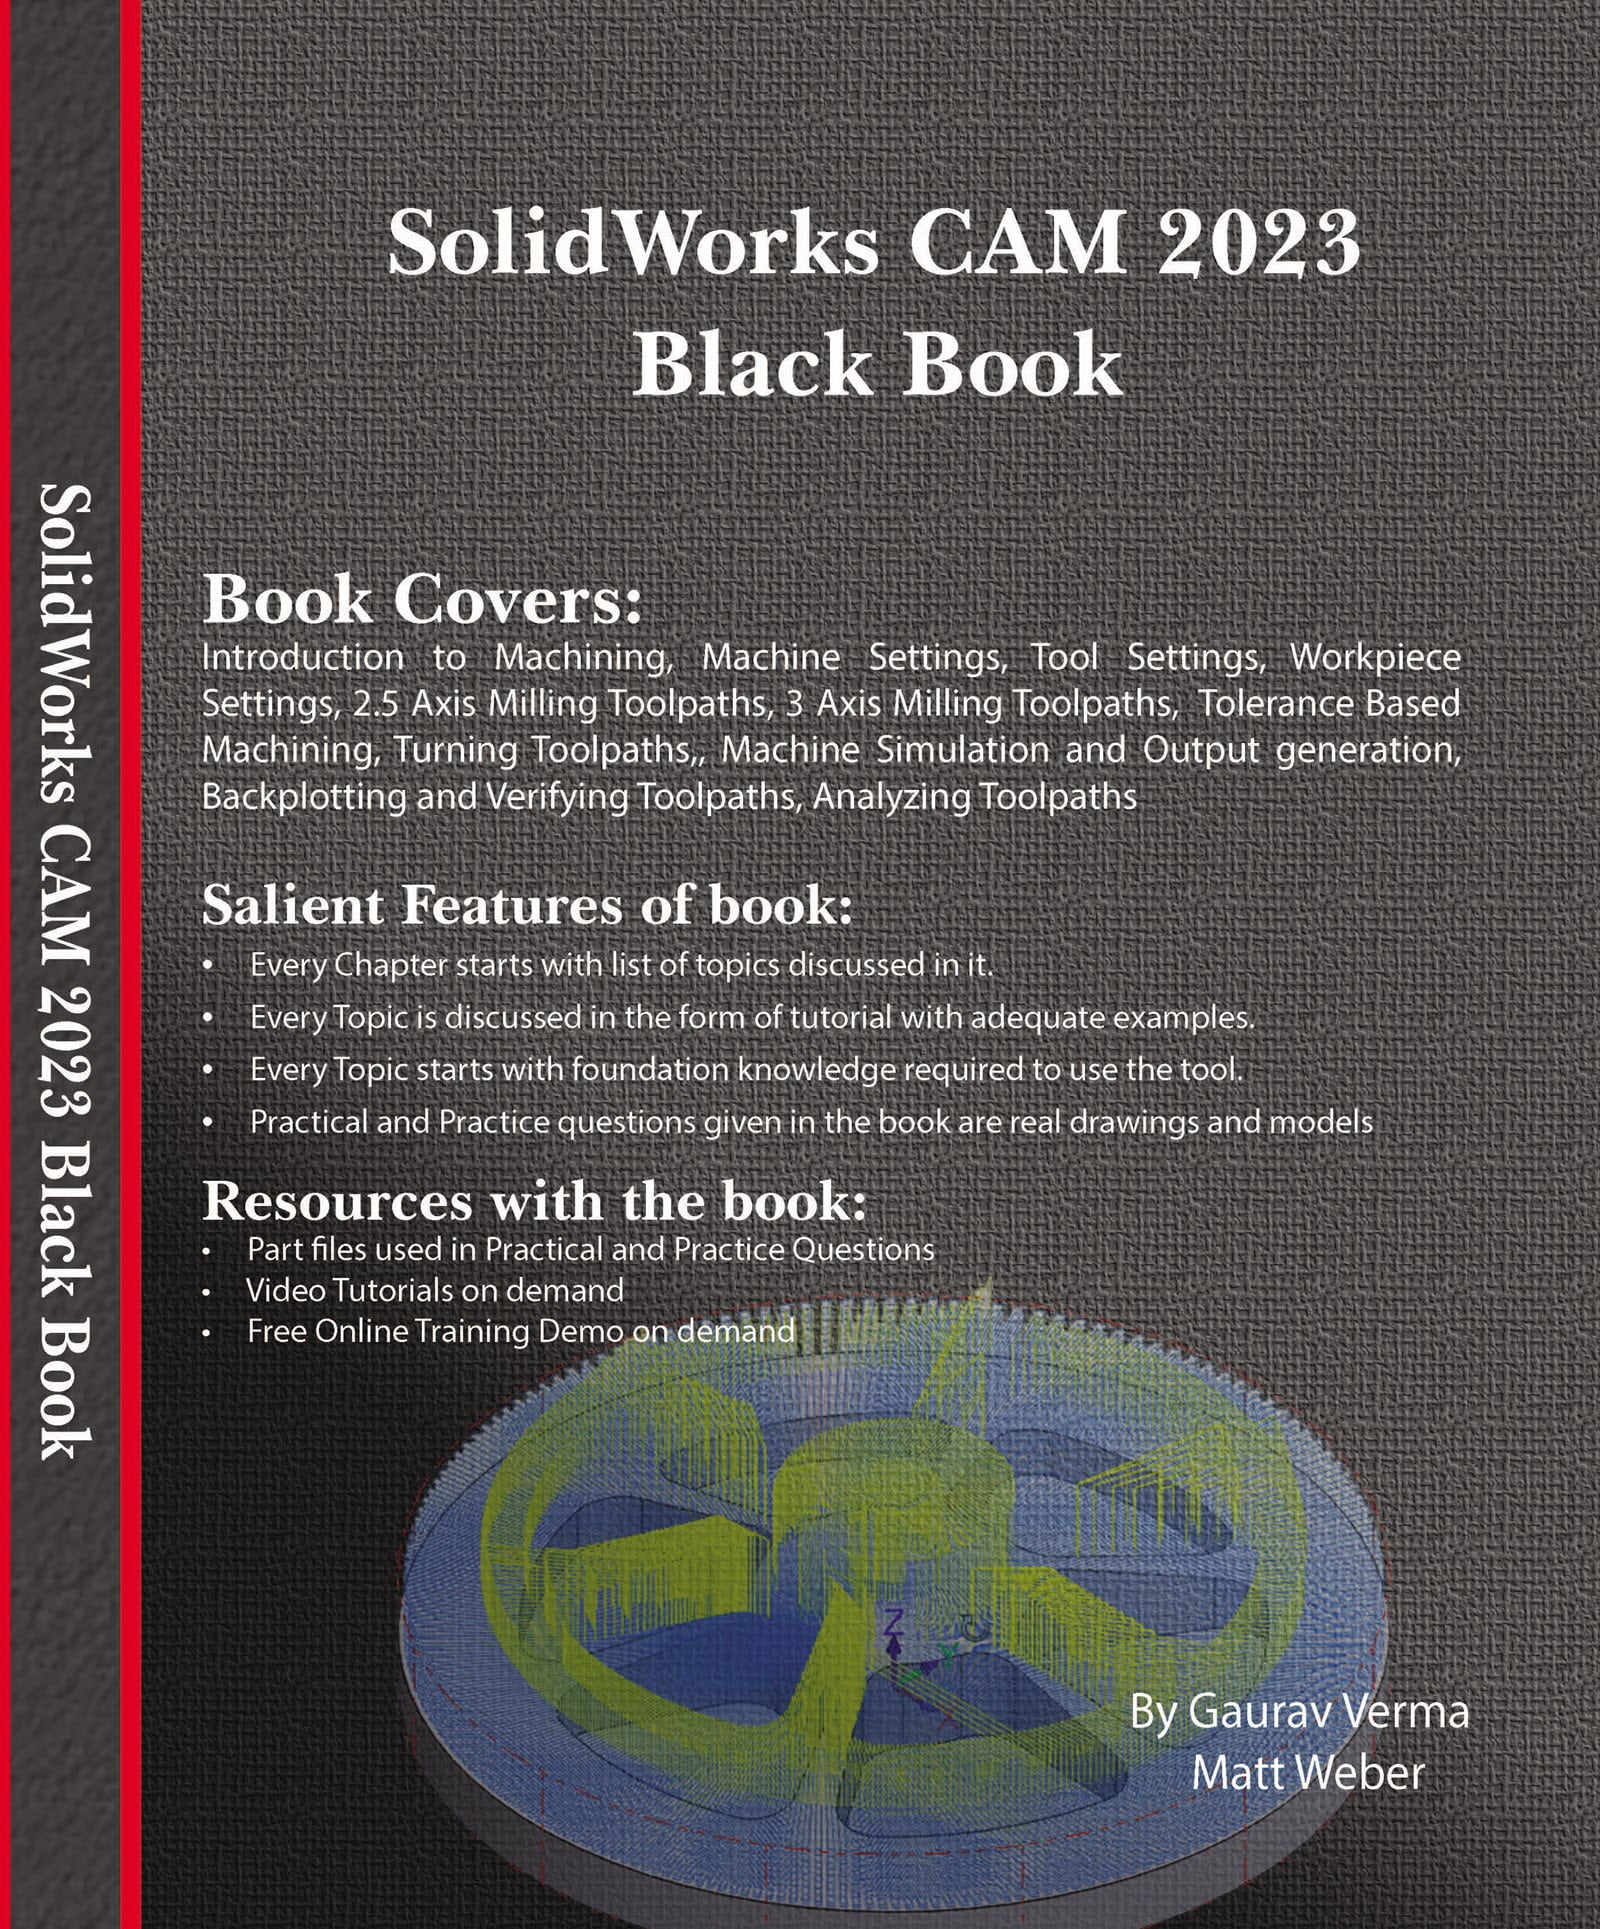 SolidWorks CAM 2023 cover image